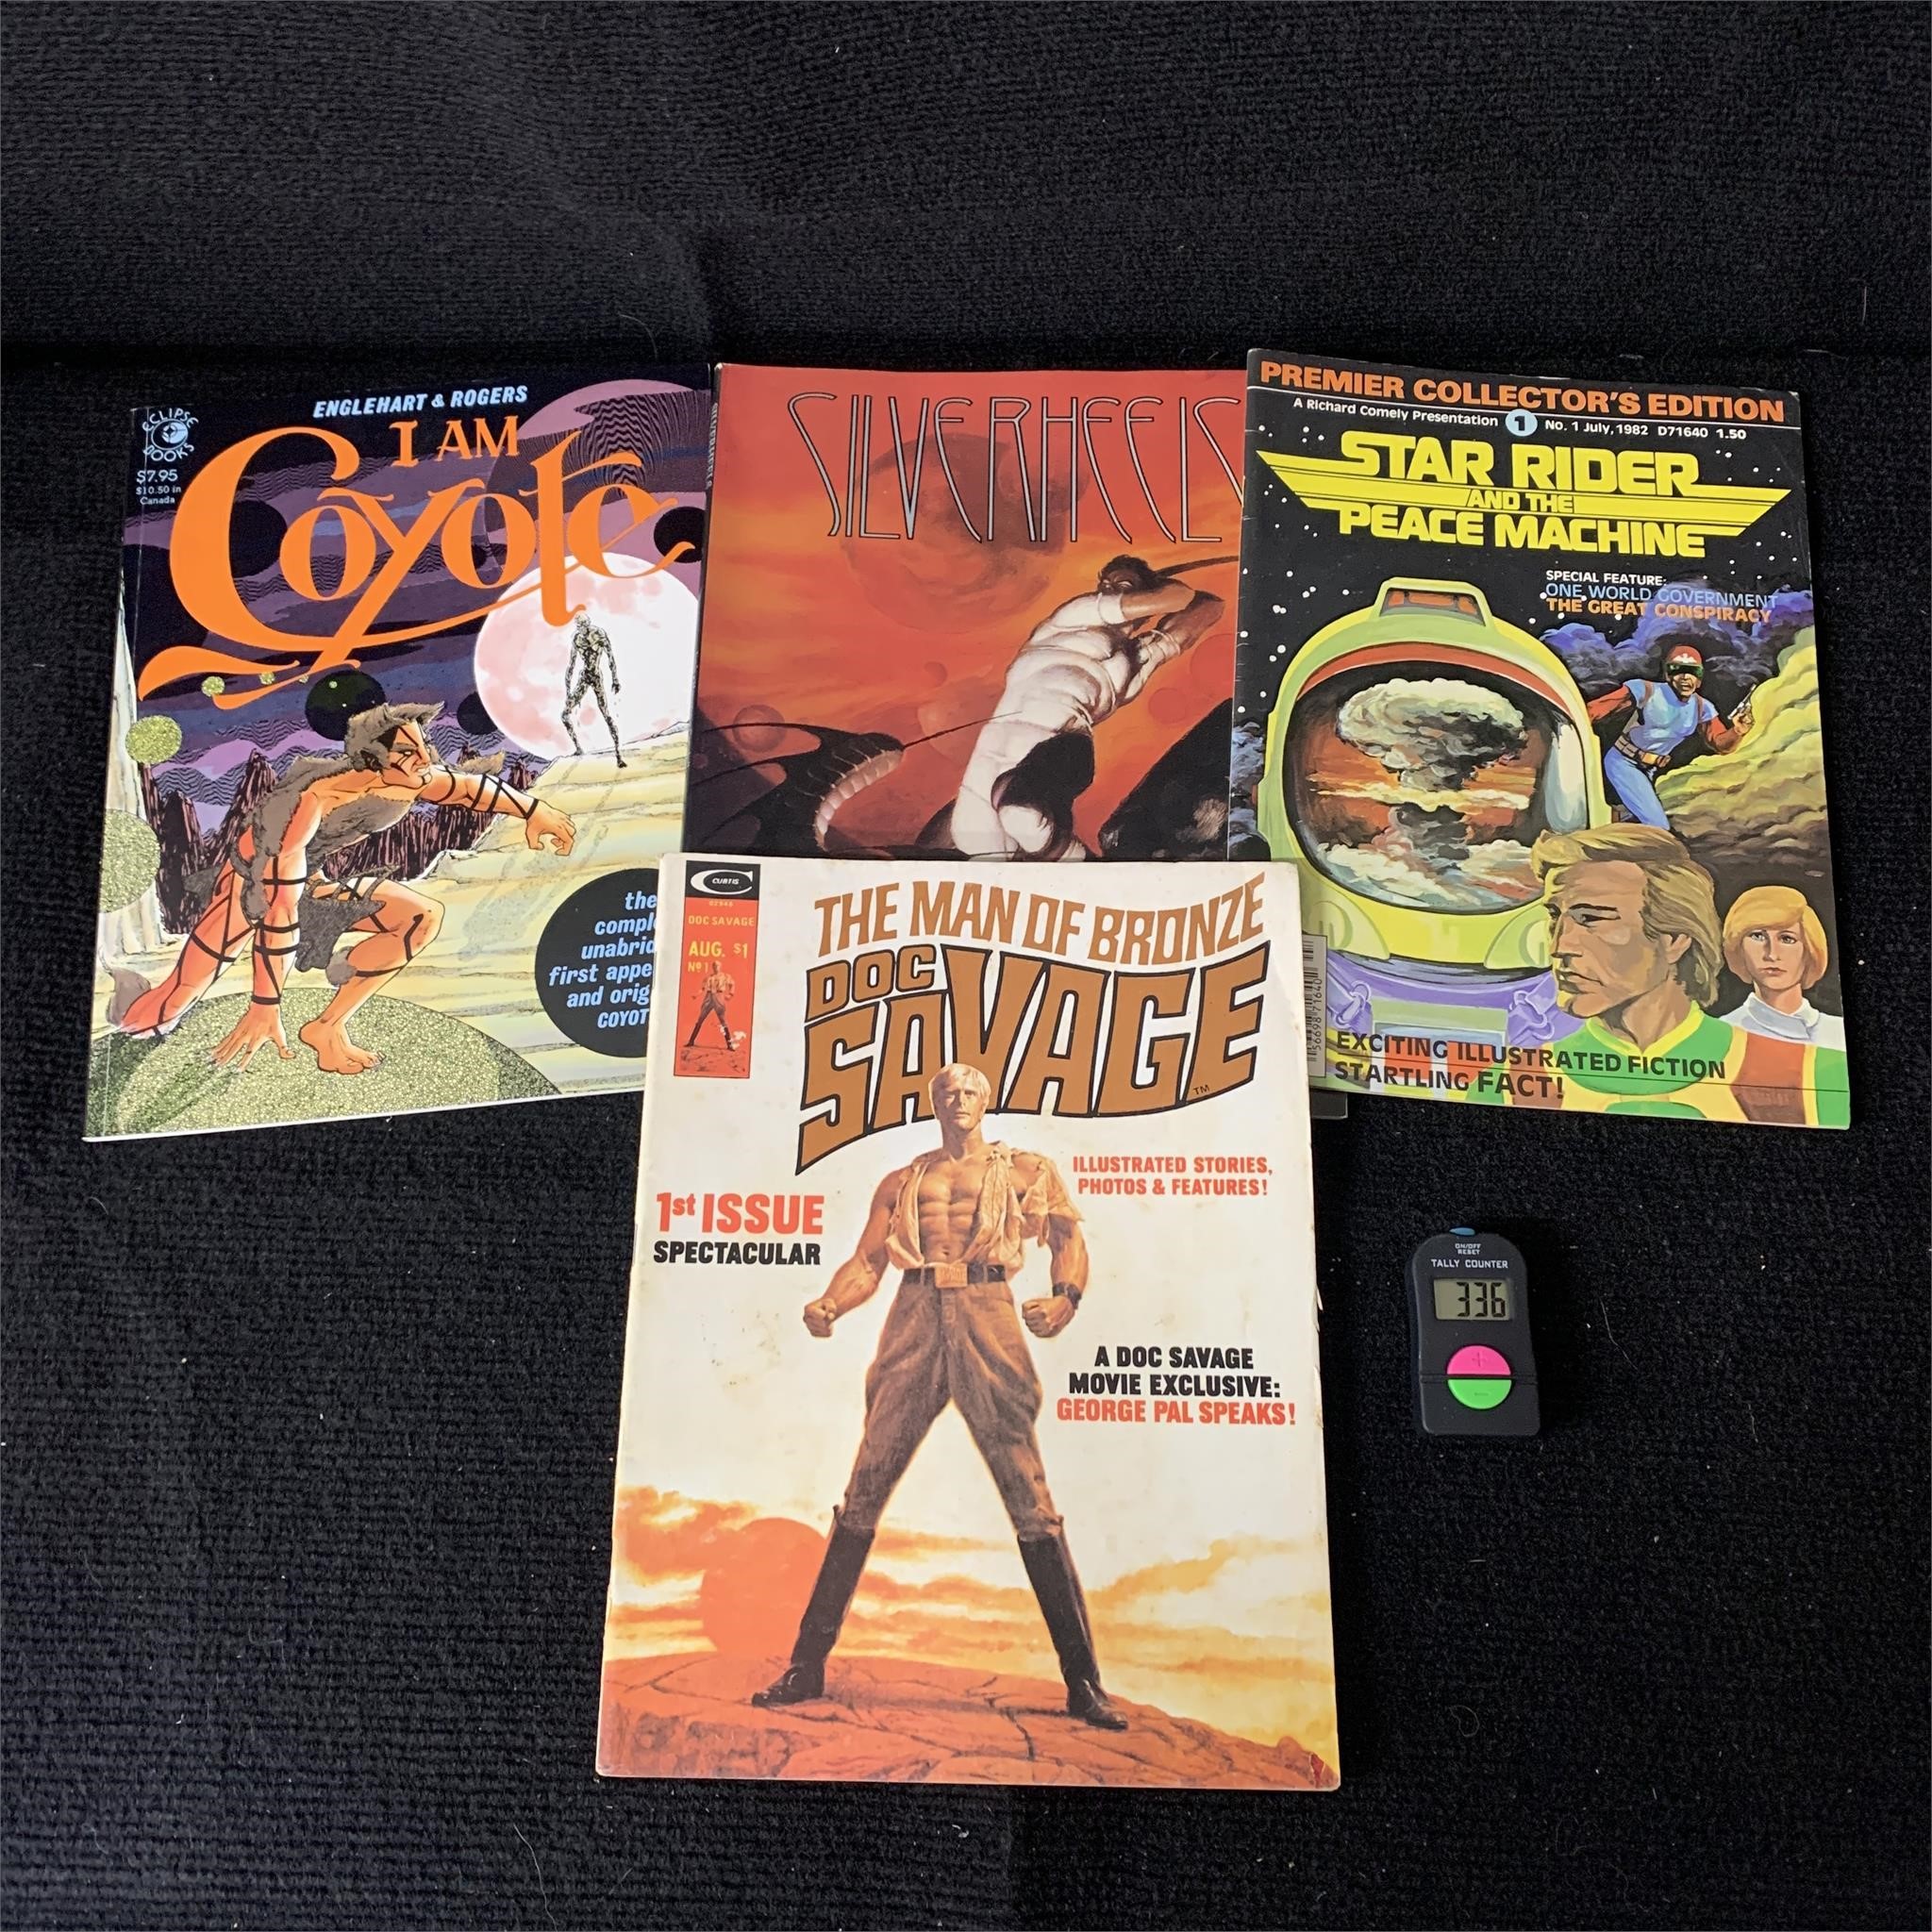 Star Wars, Disney, Sci-fi Collectibles Auction